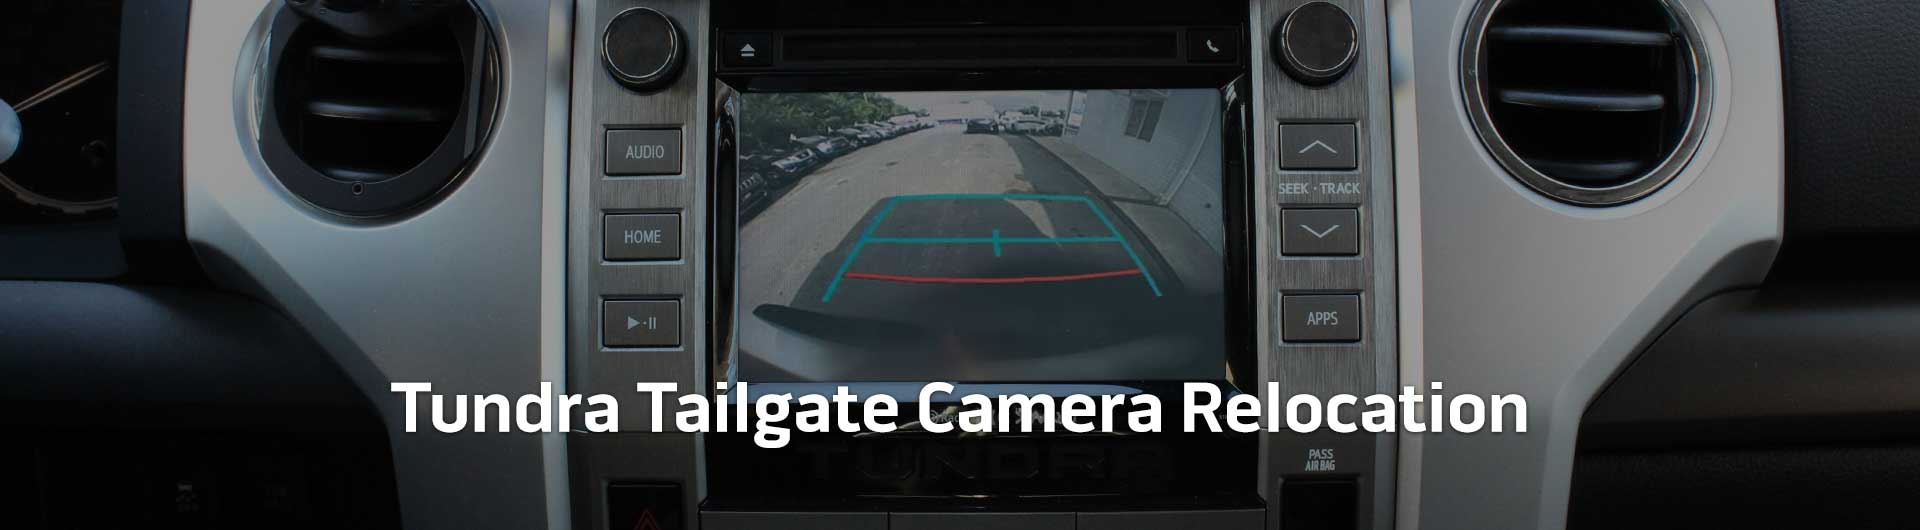 An image showing the in-dash monitor of a Toyota Tundra. The in-dash monitor shows that the truck is in reverse and is displaying the backup camera. The image has text that reads Toyota Tundra Tailgate Camera Relocation.